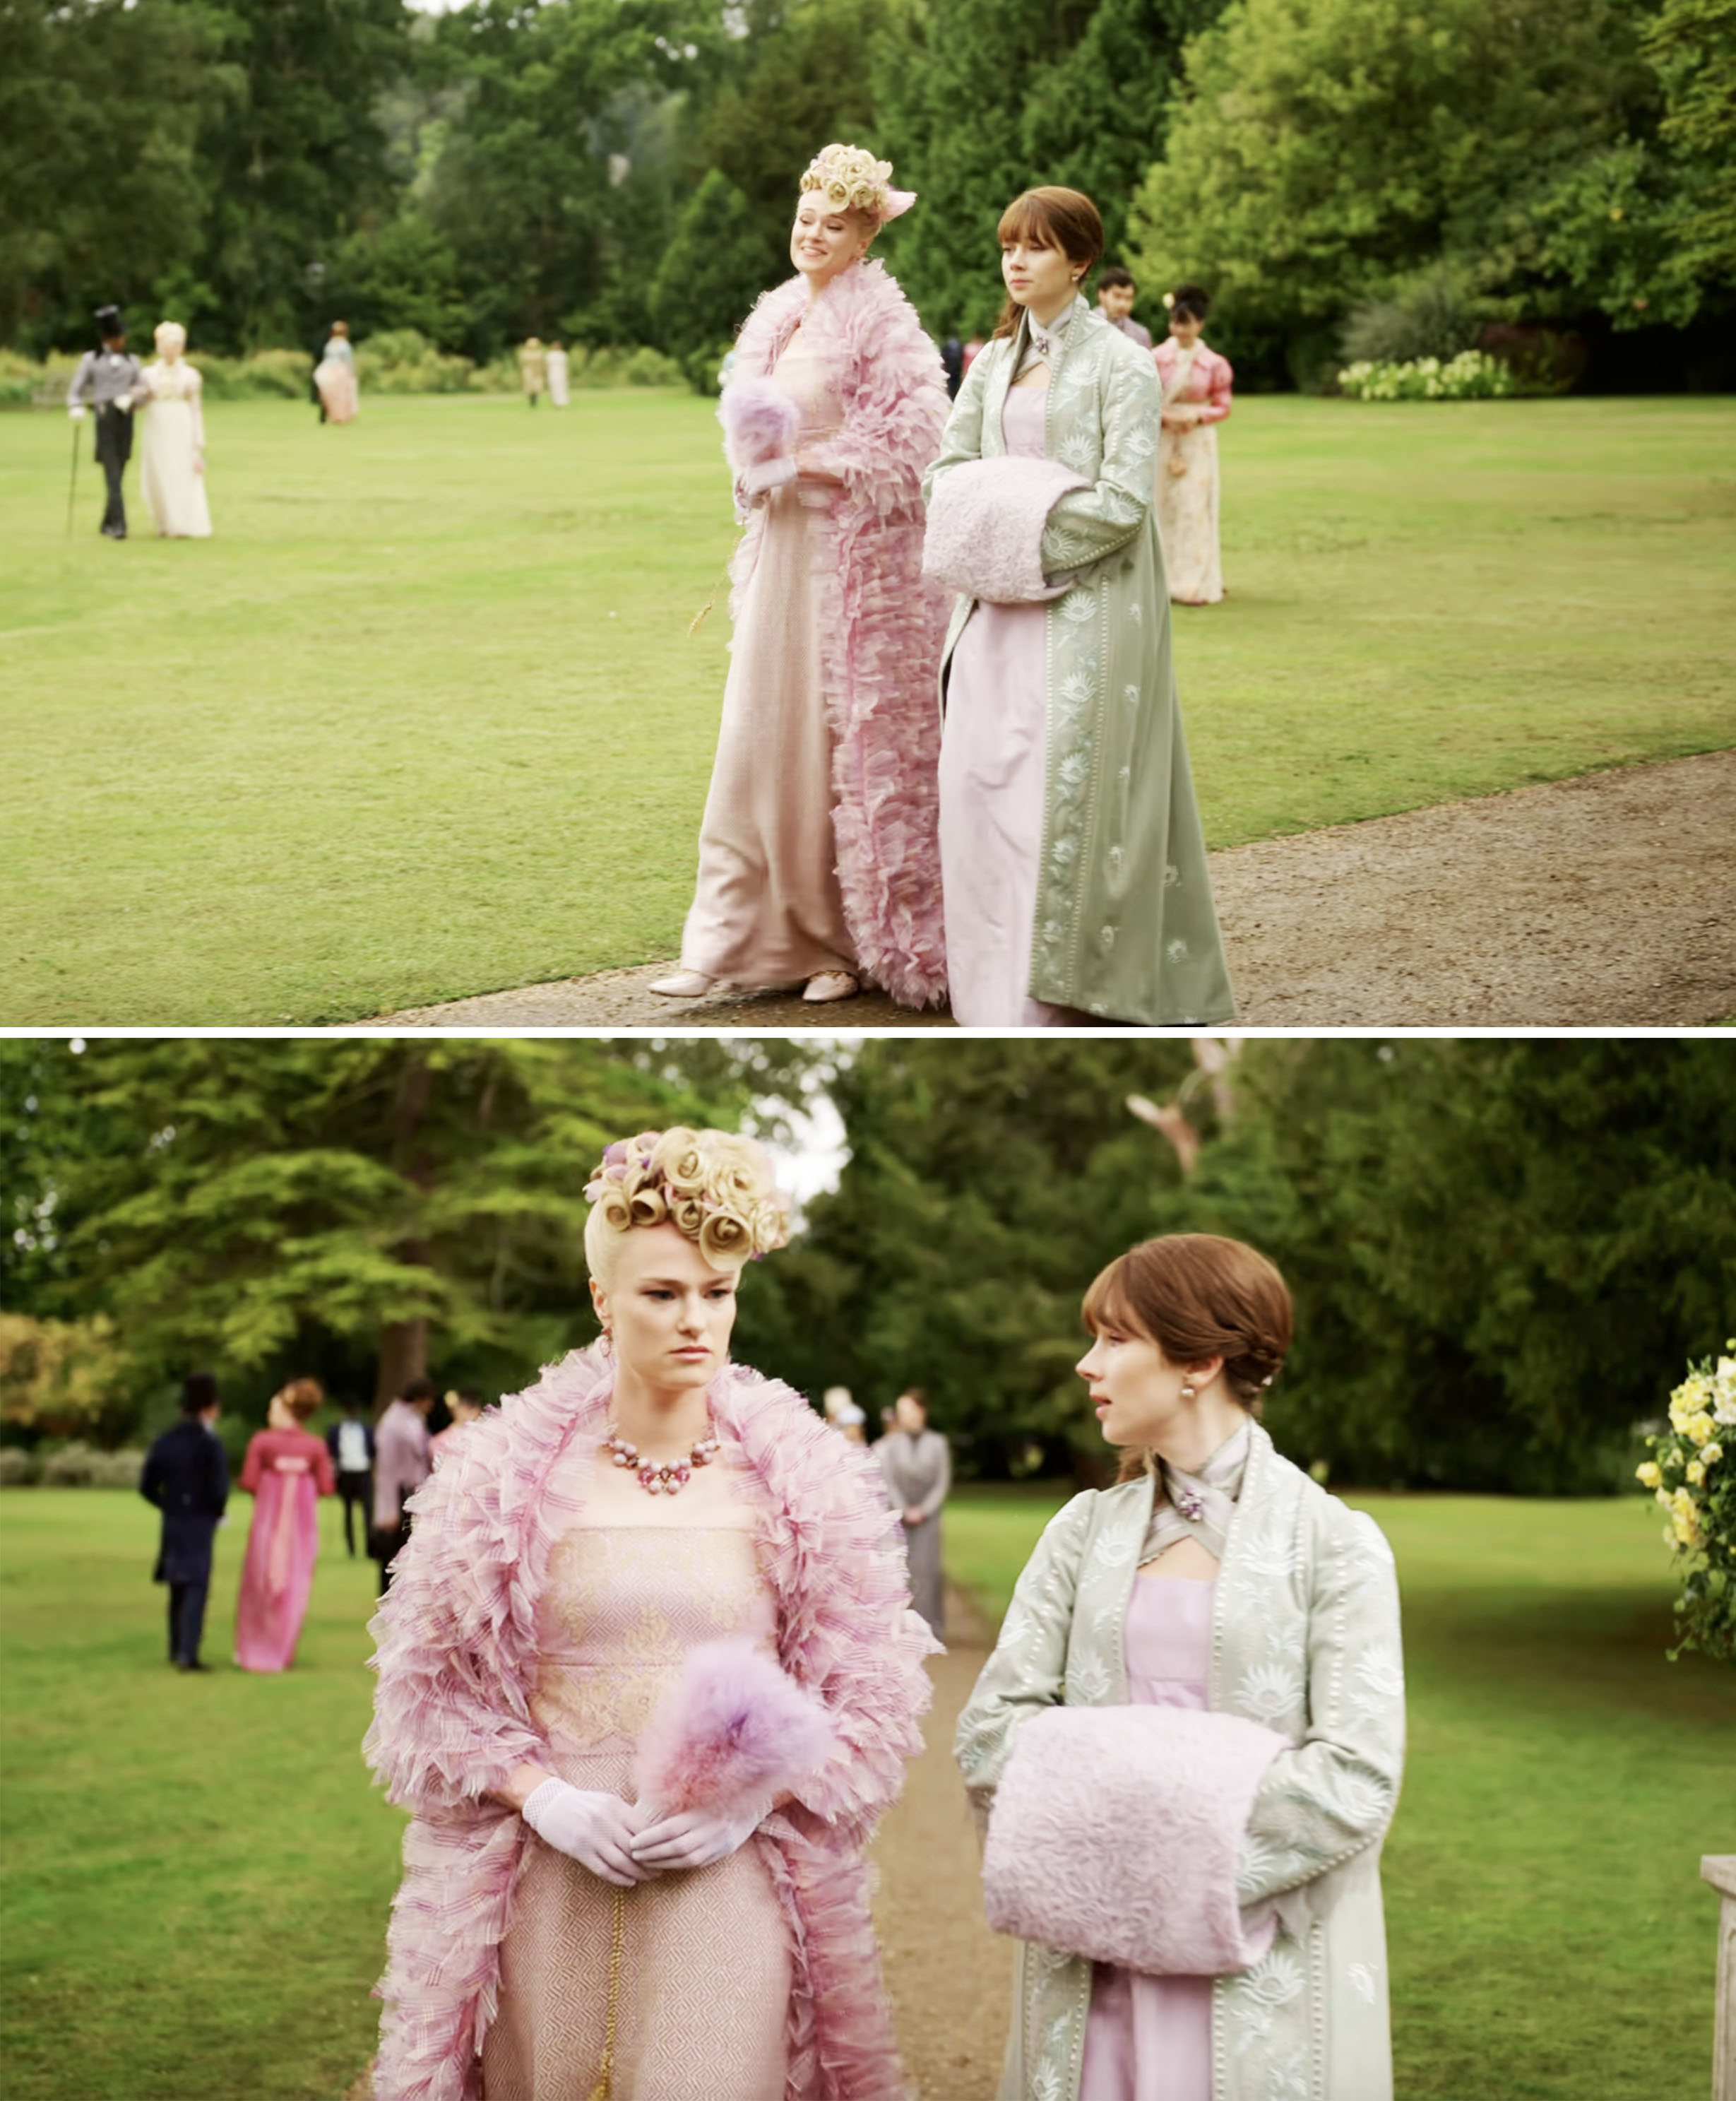 Cressida and Eloise from &quot;Bridgerton&quot; are strolling on a garden path, wearing elegant pastel-colored period dresses